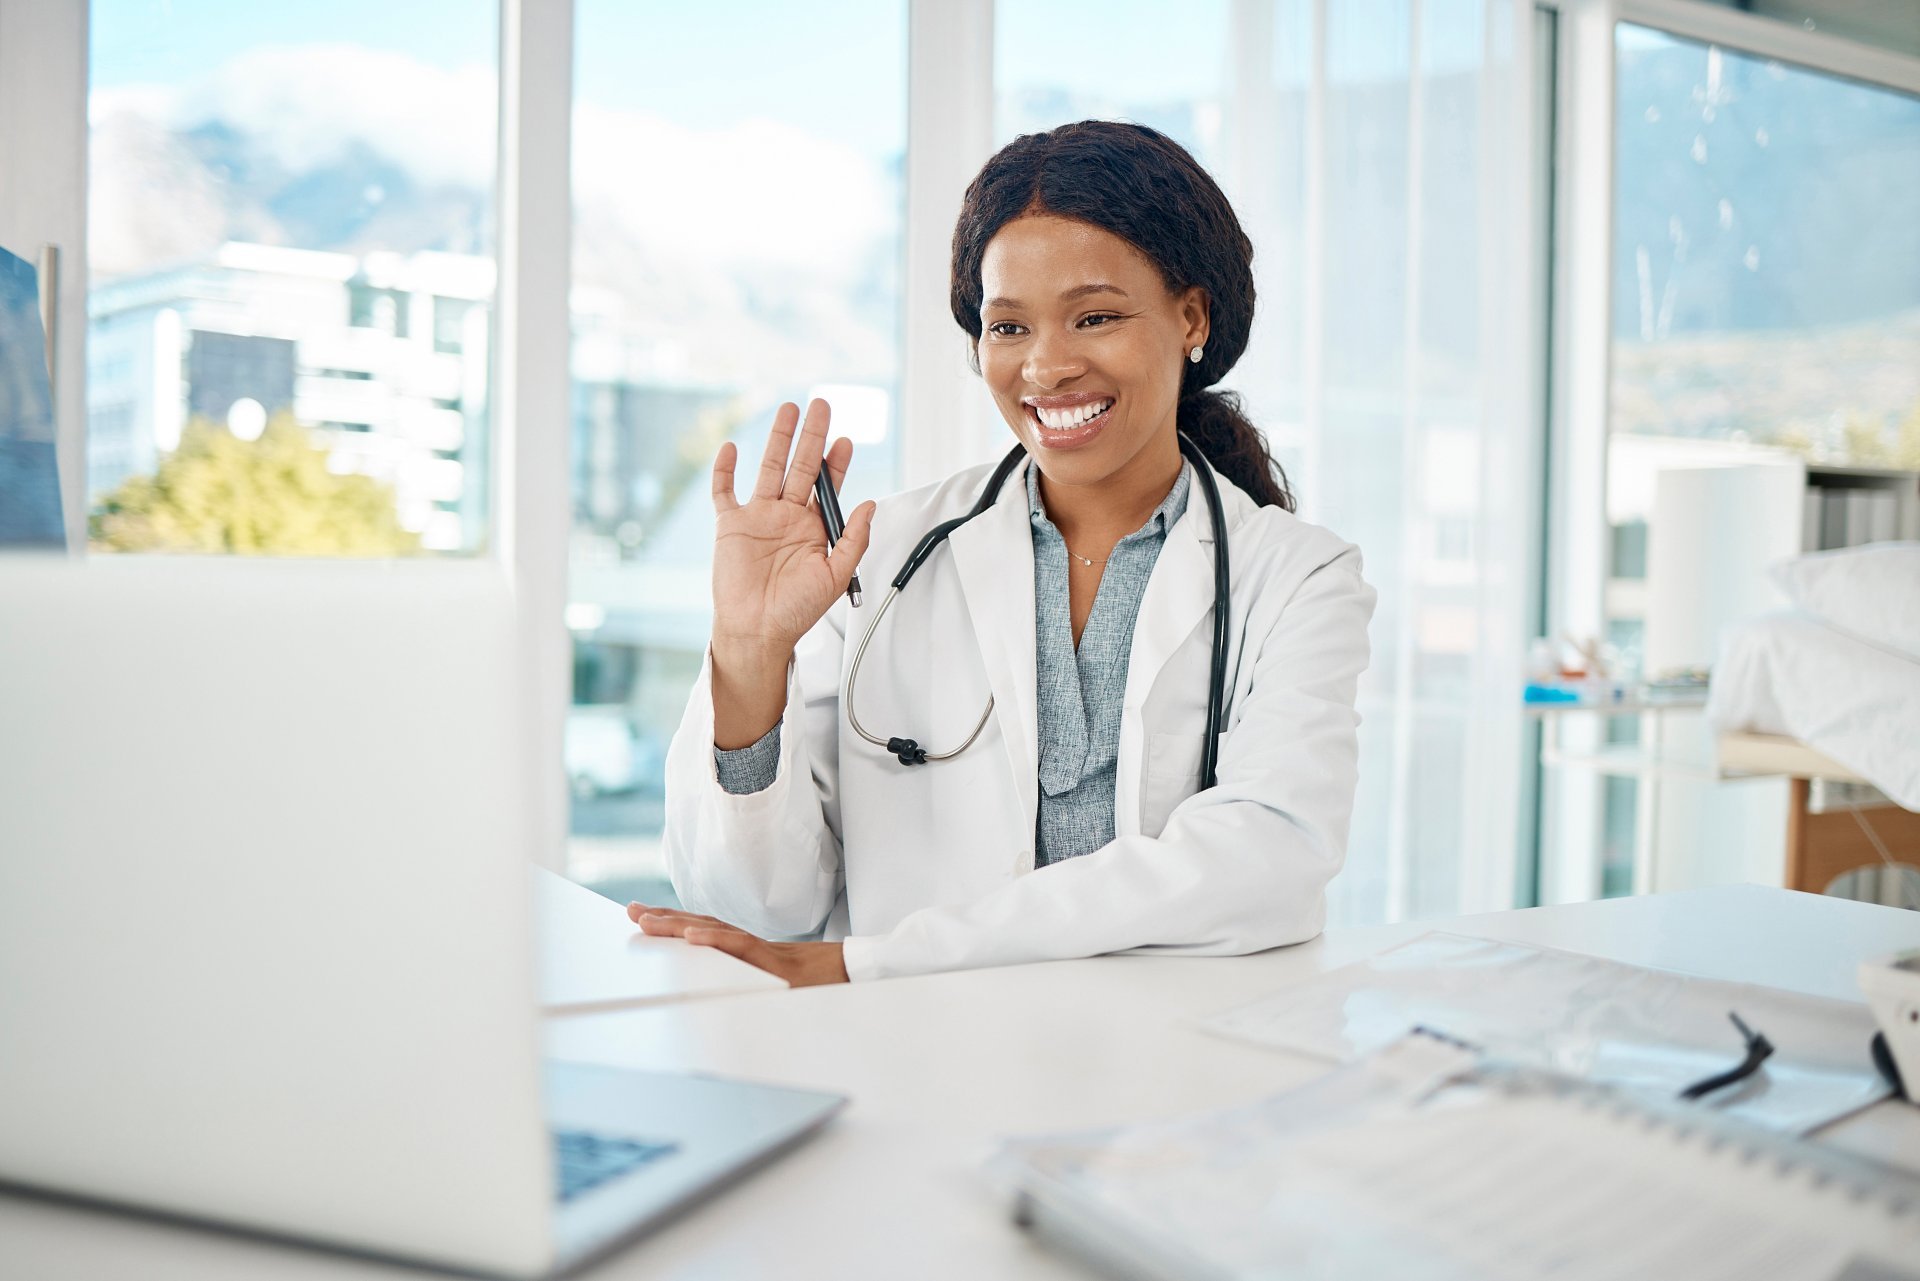 A young female healthcare provider greets her patient during a virtual visit conducted via her laptop.